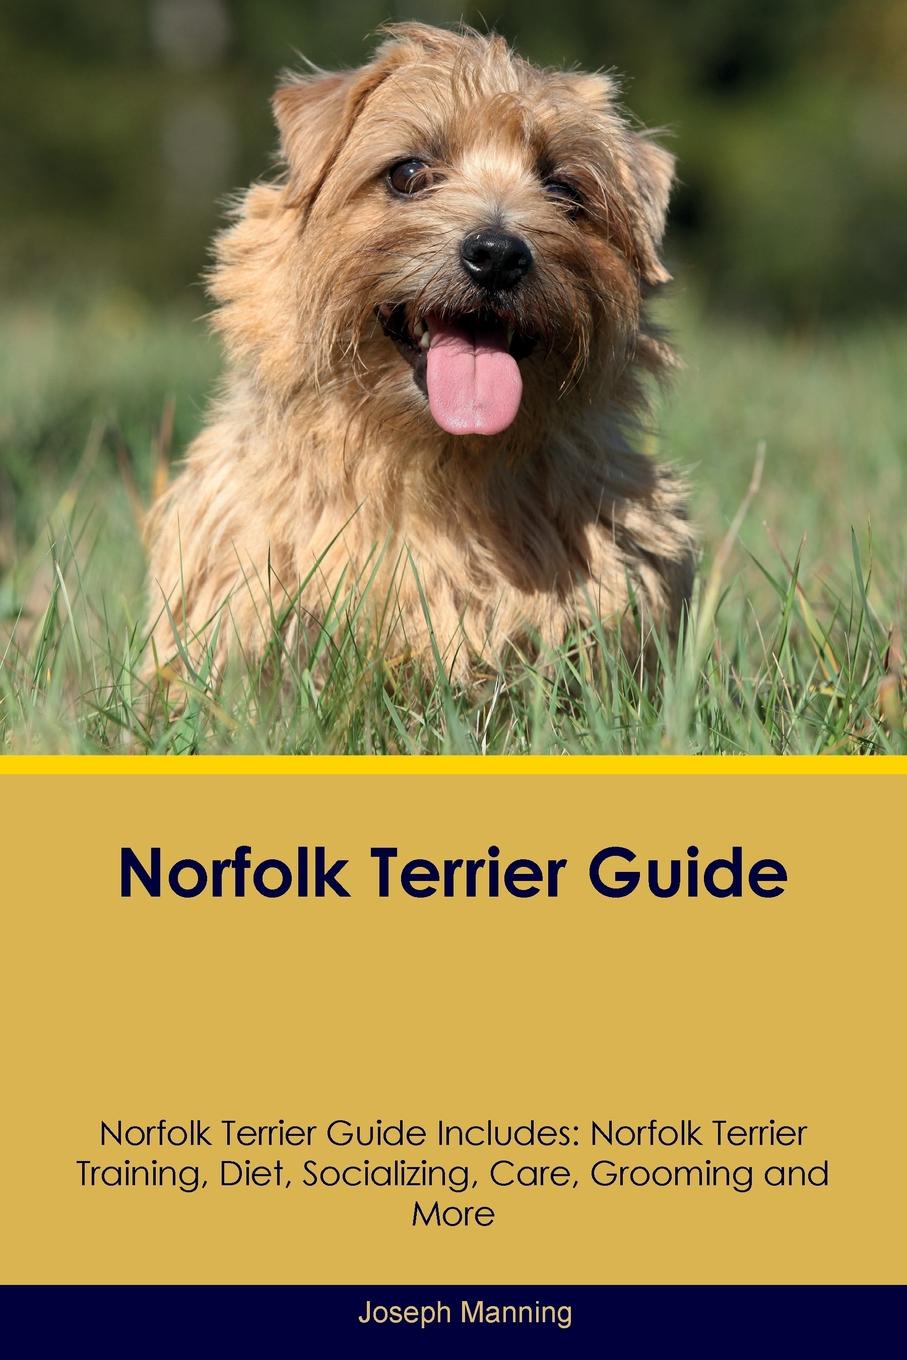 Norfolk Terrier Guide Norfolk Terrier Guide Includes. Norfolk Terrier Training, Diet, Socializing, Care, Grooming, Breeding and More